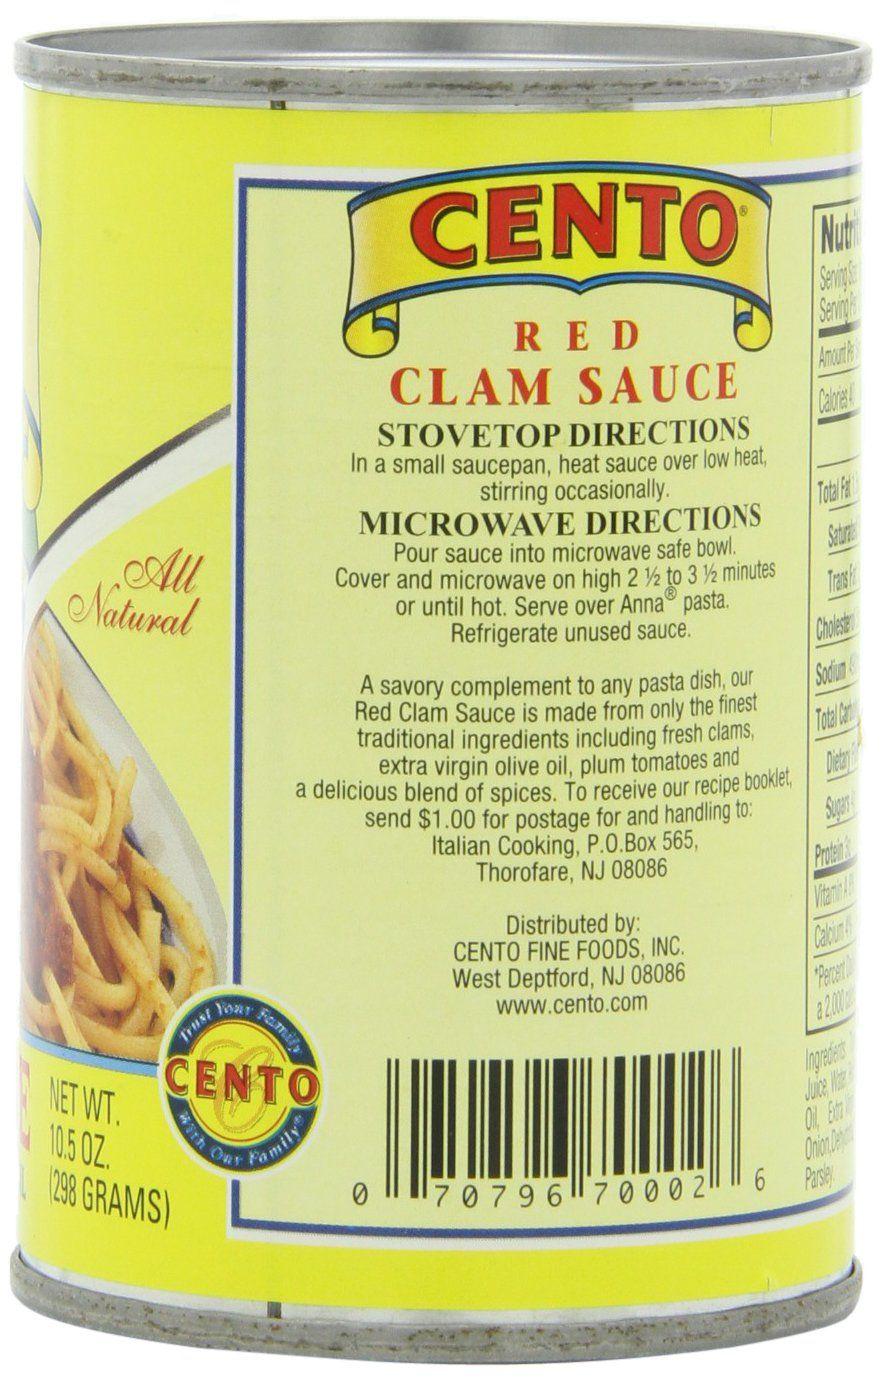 Yellow and Red Clam Logo - Amazon.com : Cento Red Clam Sauce, 10.5 Ounce Cans Pack of 12